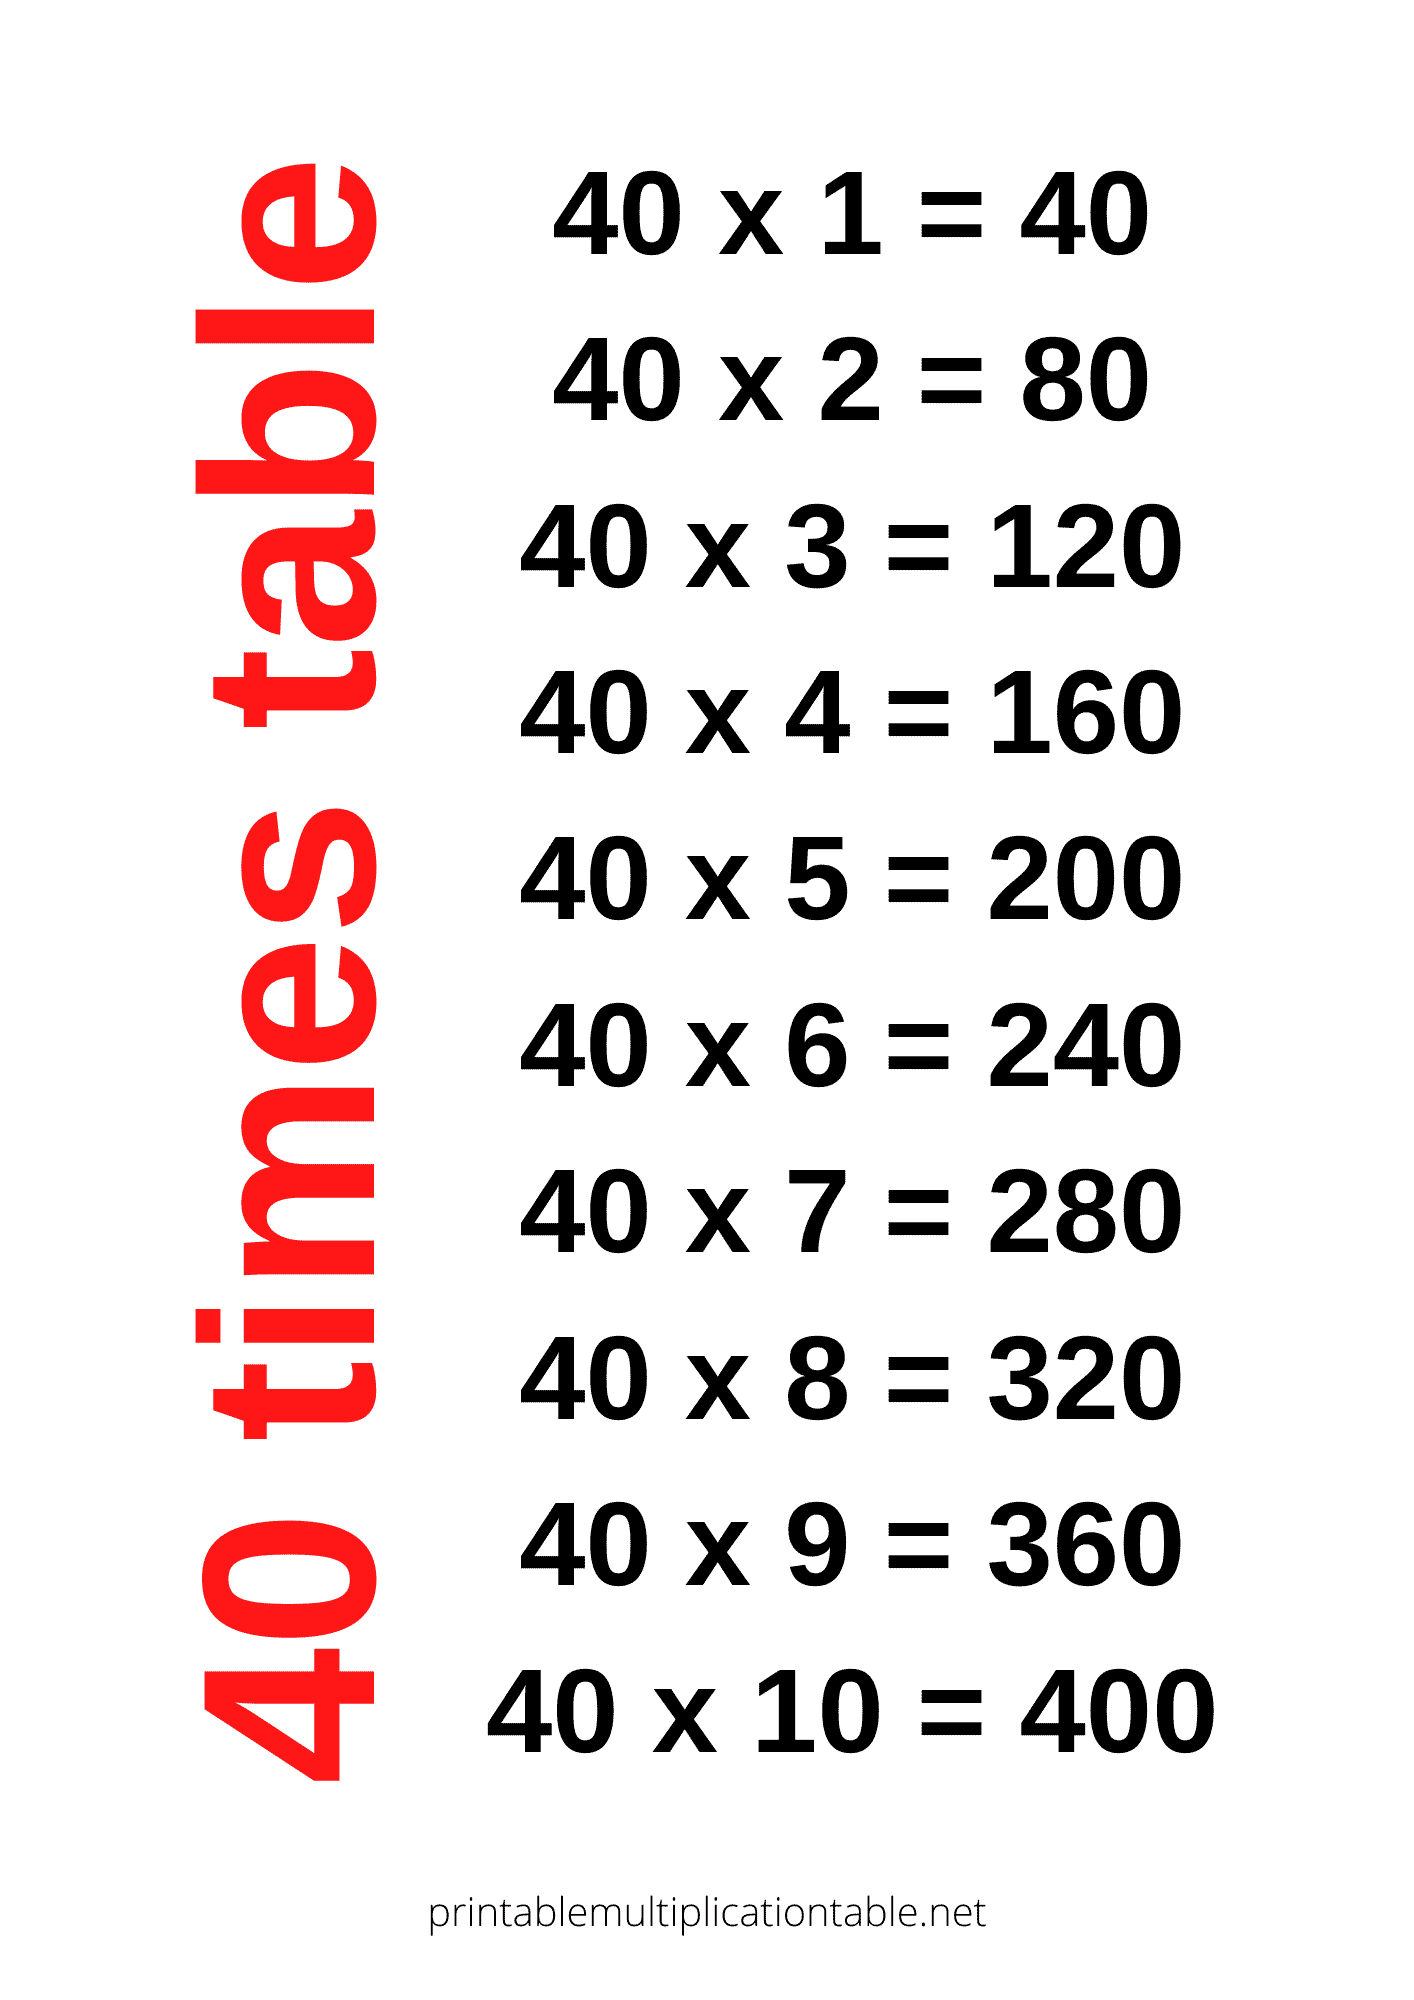 40 times table chart